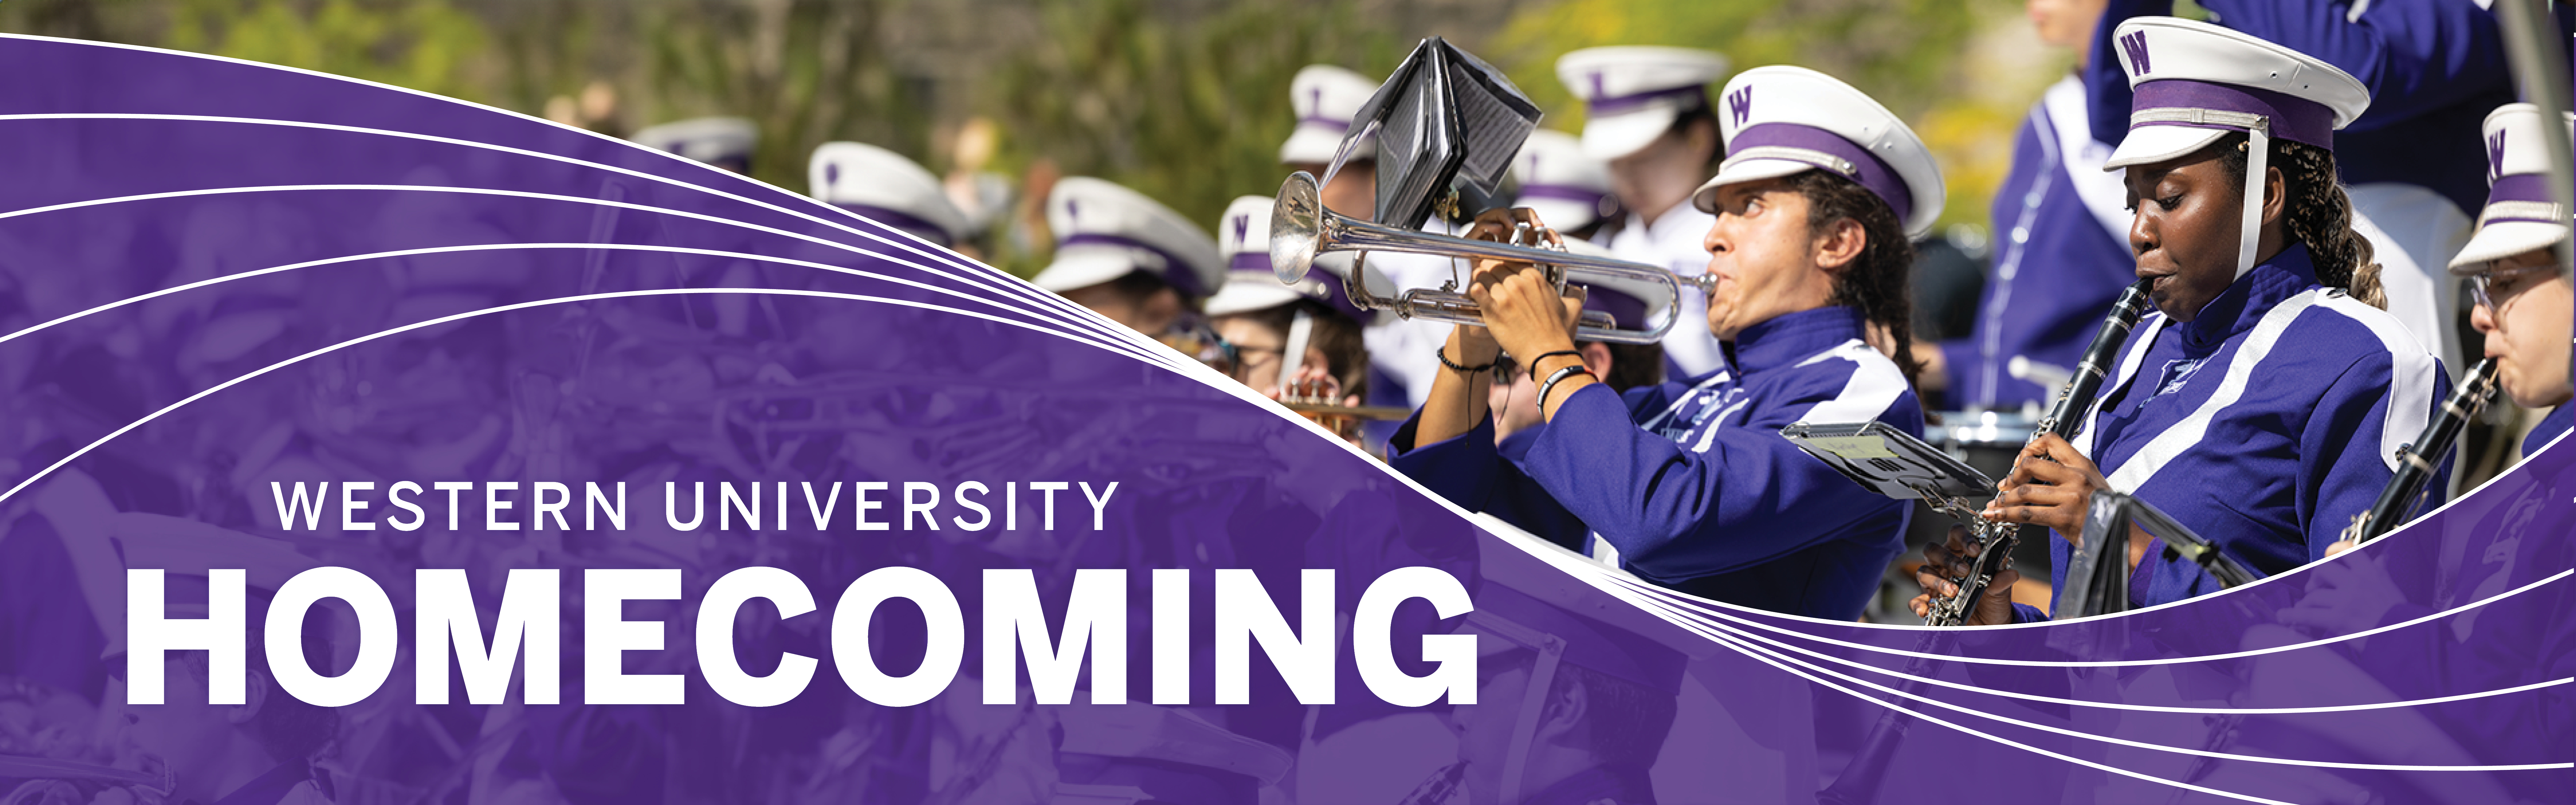 The marching band performs